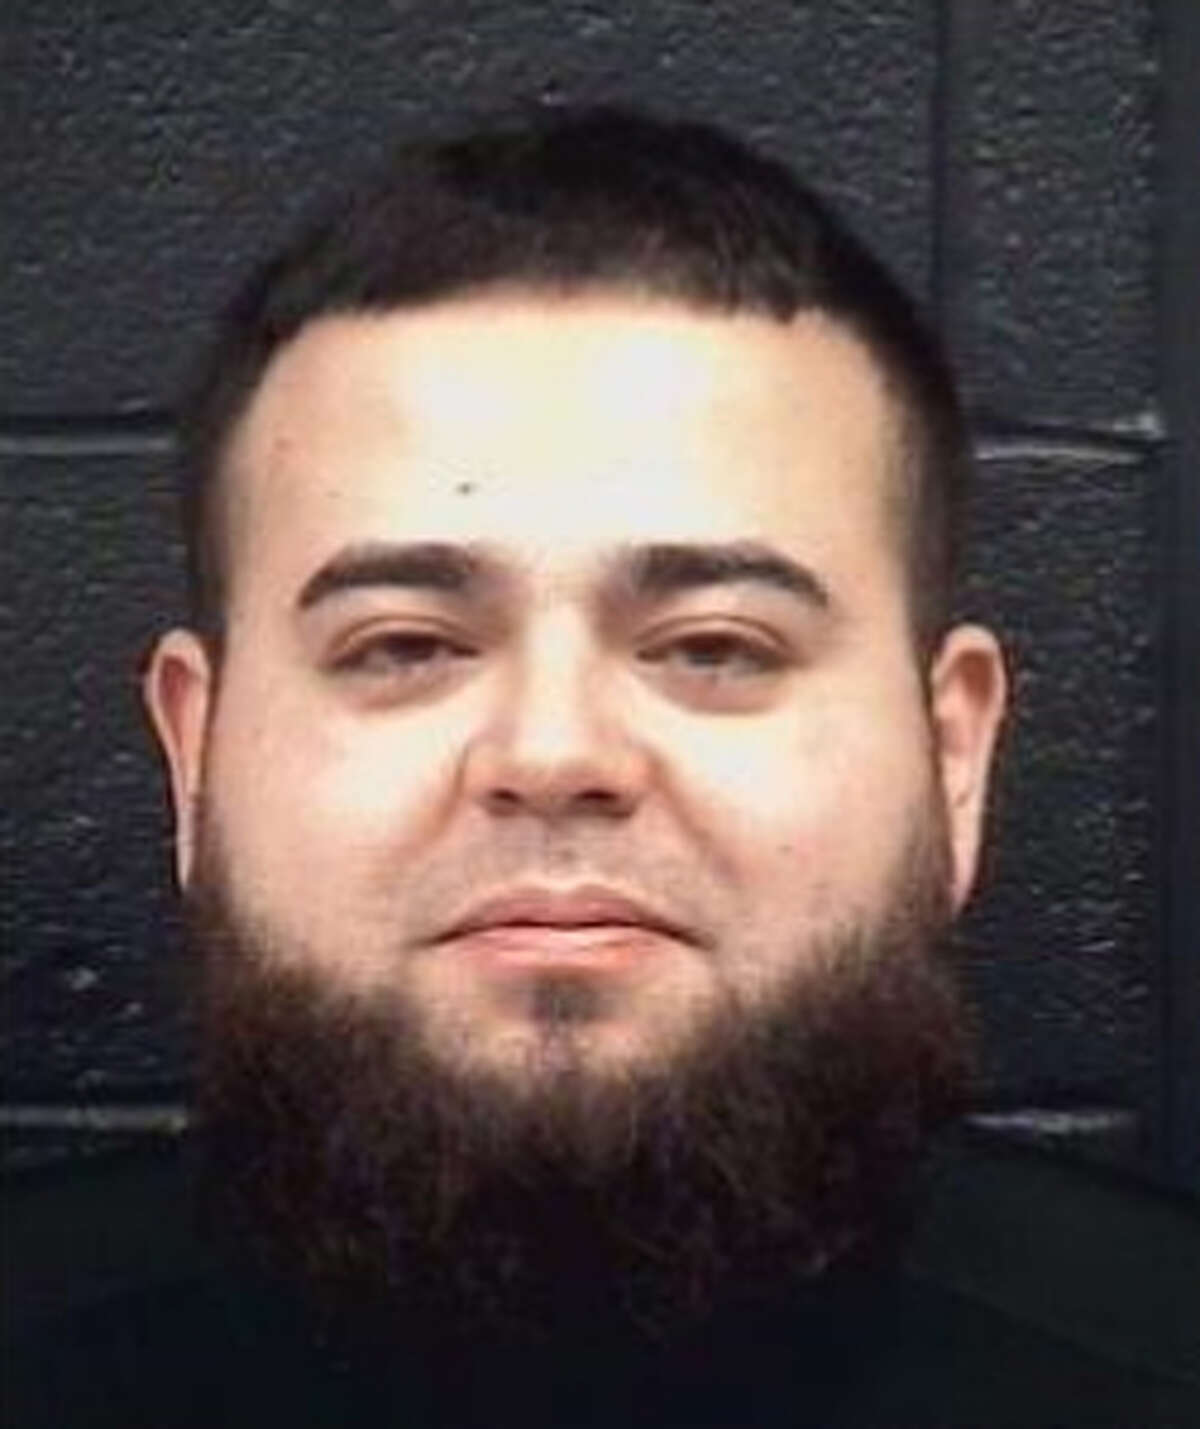 David Gerardo Alcacio was charged with driving while intoxicated.